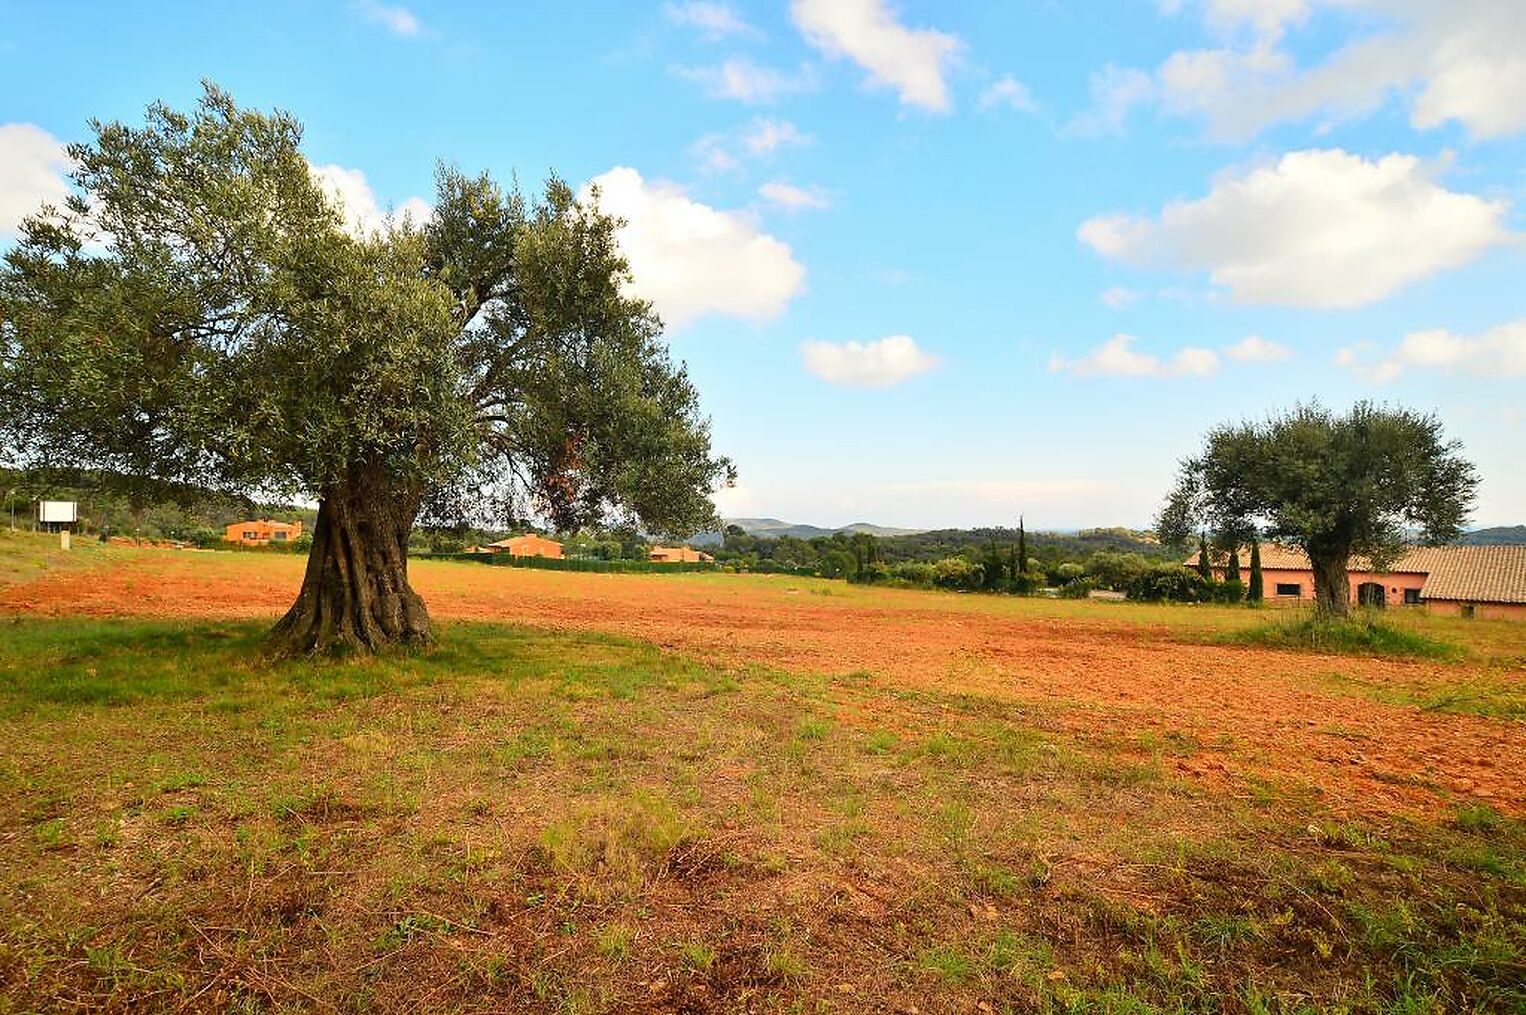 Superb selection of plots for sale on large flat plots with both sea and rural views available, and just 5 minutes by car to Palamos.